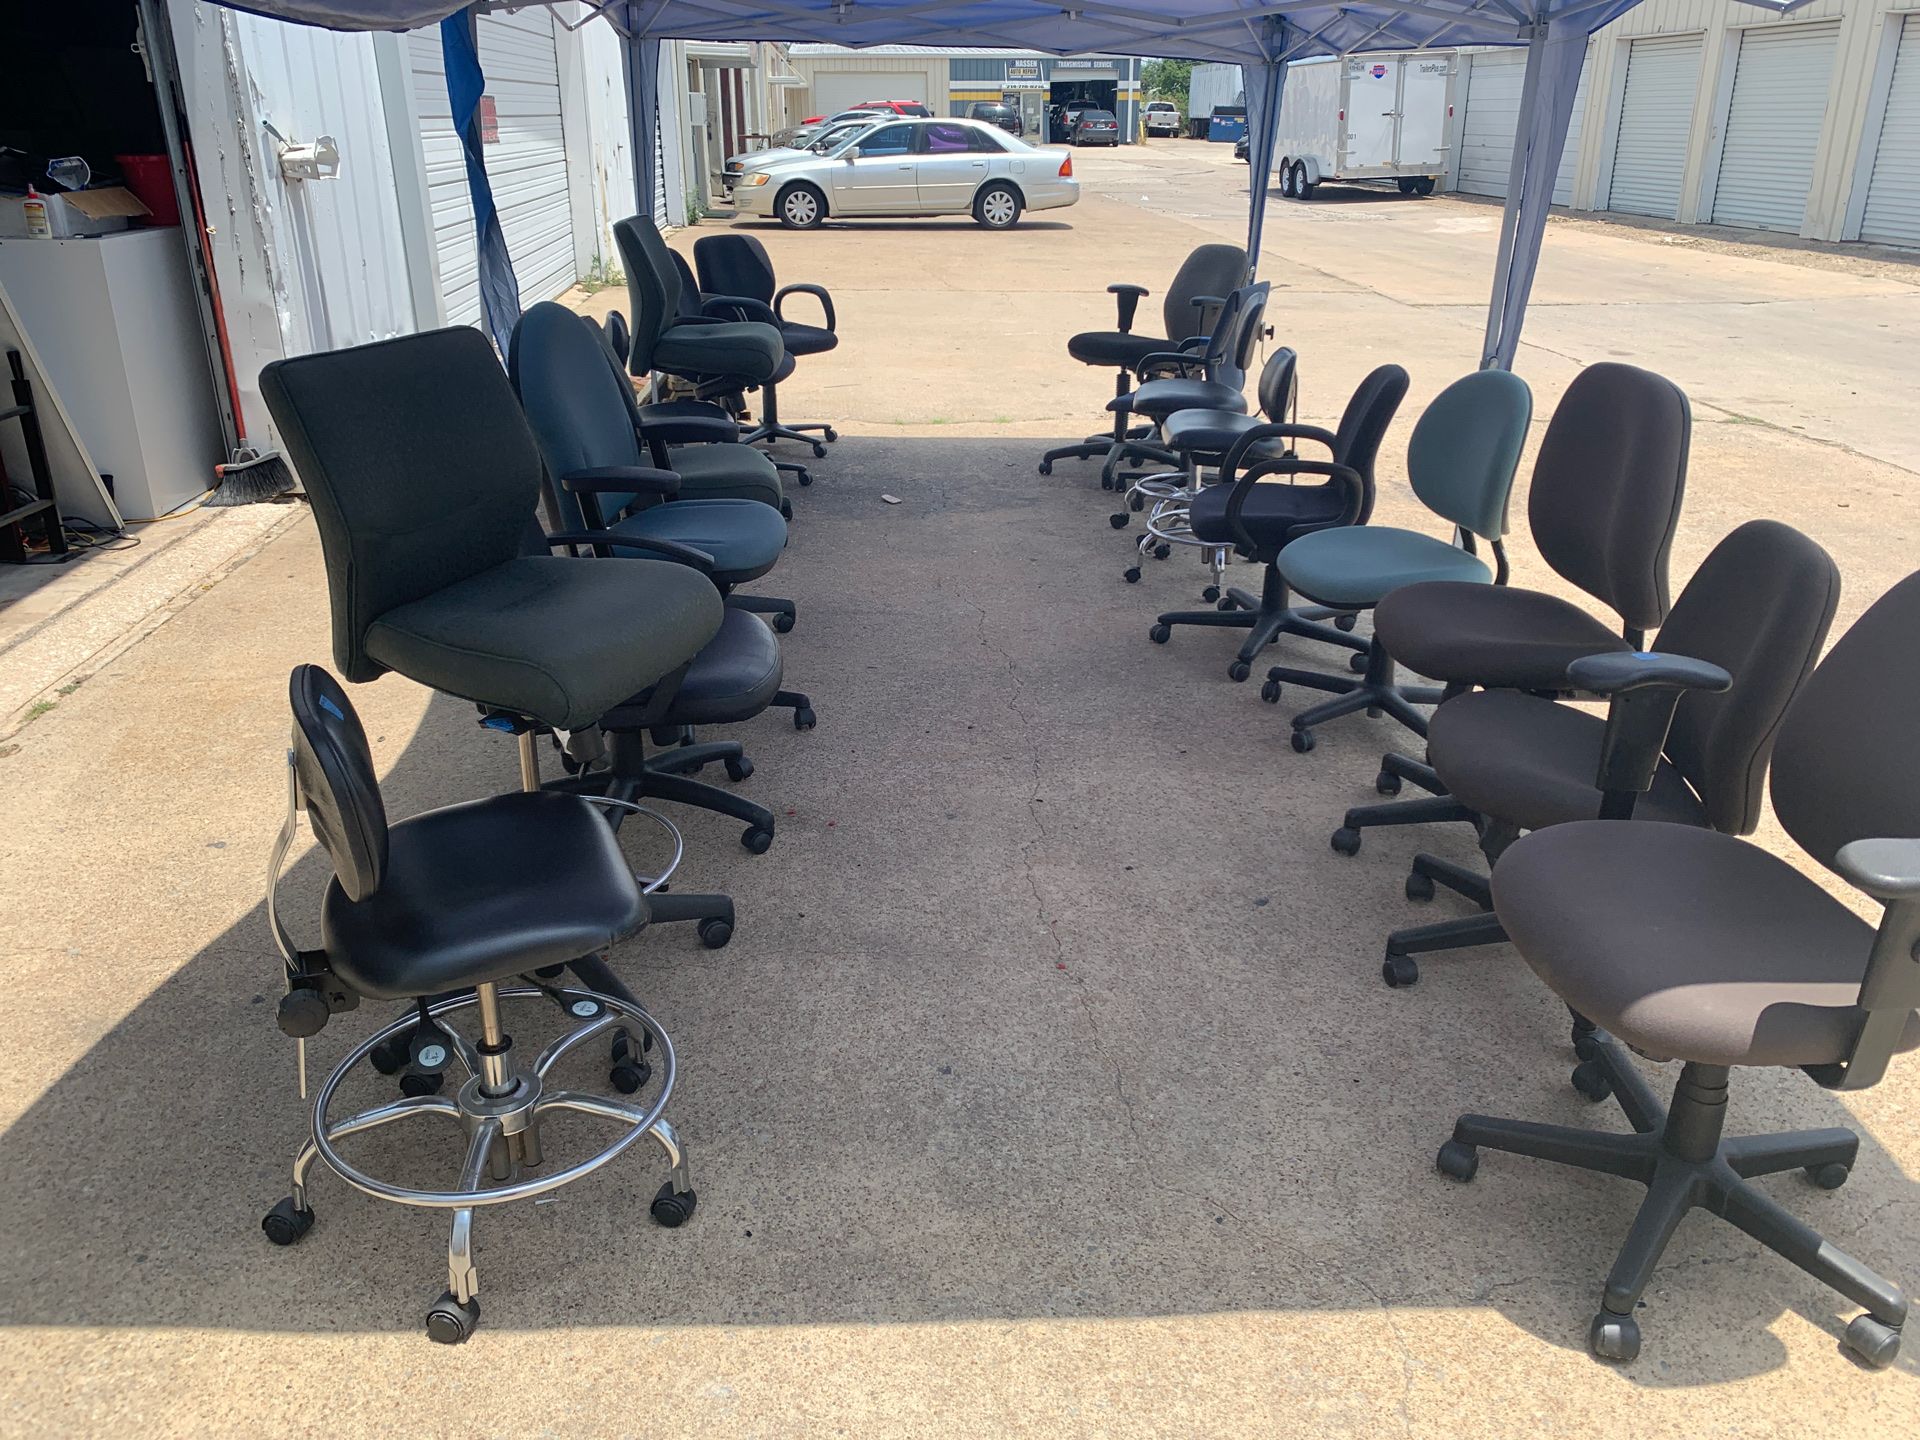 Sale office chairs